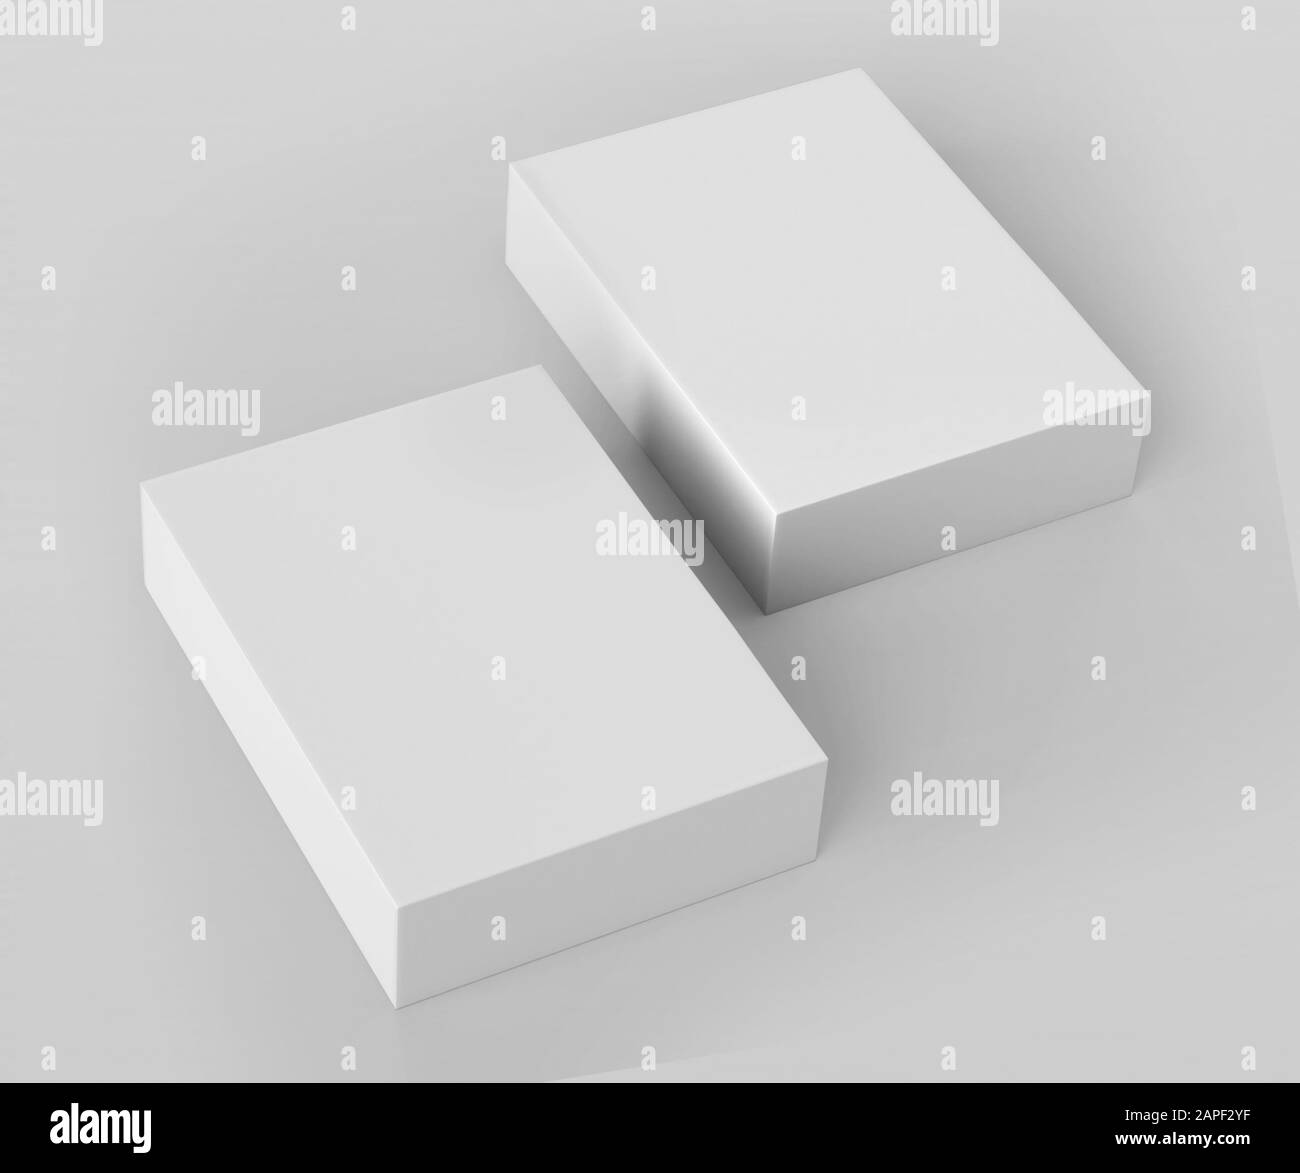 Download Blank White Software Box Mockup Medium Size Cardboard Package Box 3d Rendering Isolated On Light Gray Background Ready For Your Design Stock Photo Alamy